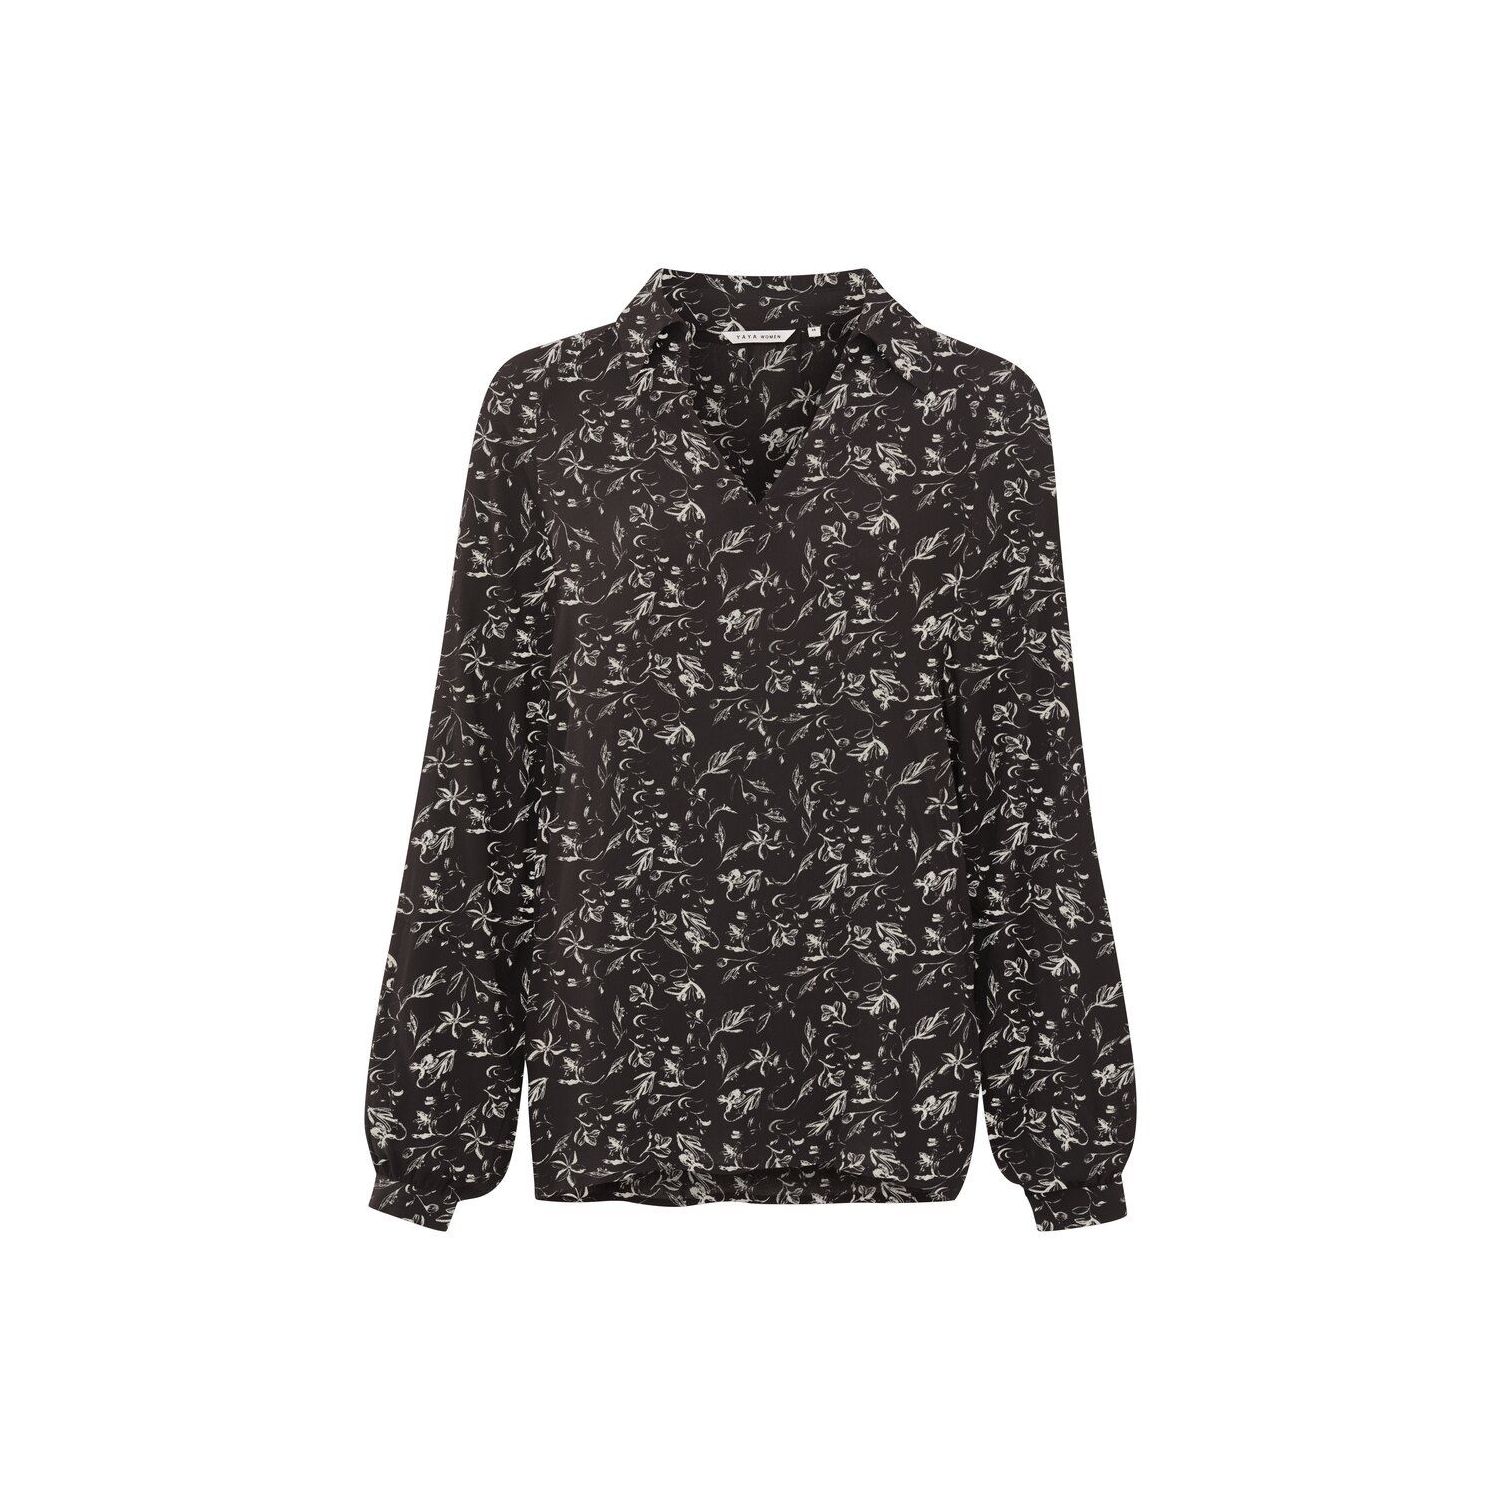 Yaya l/s printed top with open neck black dessin